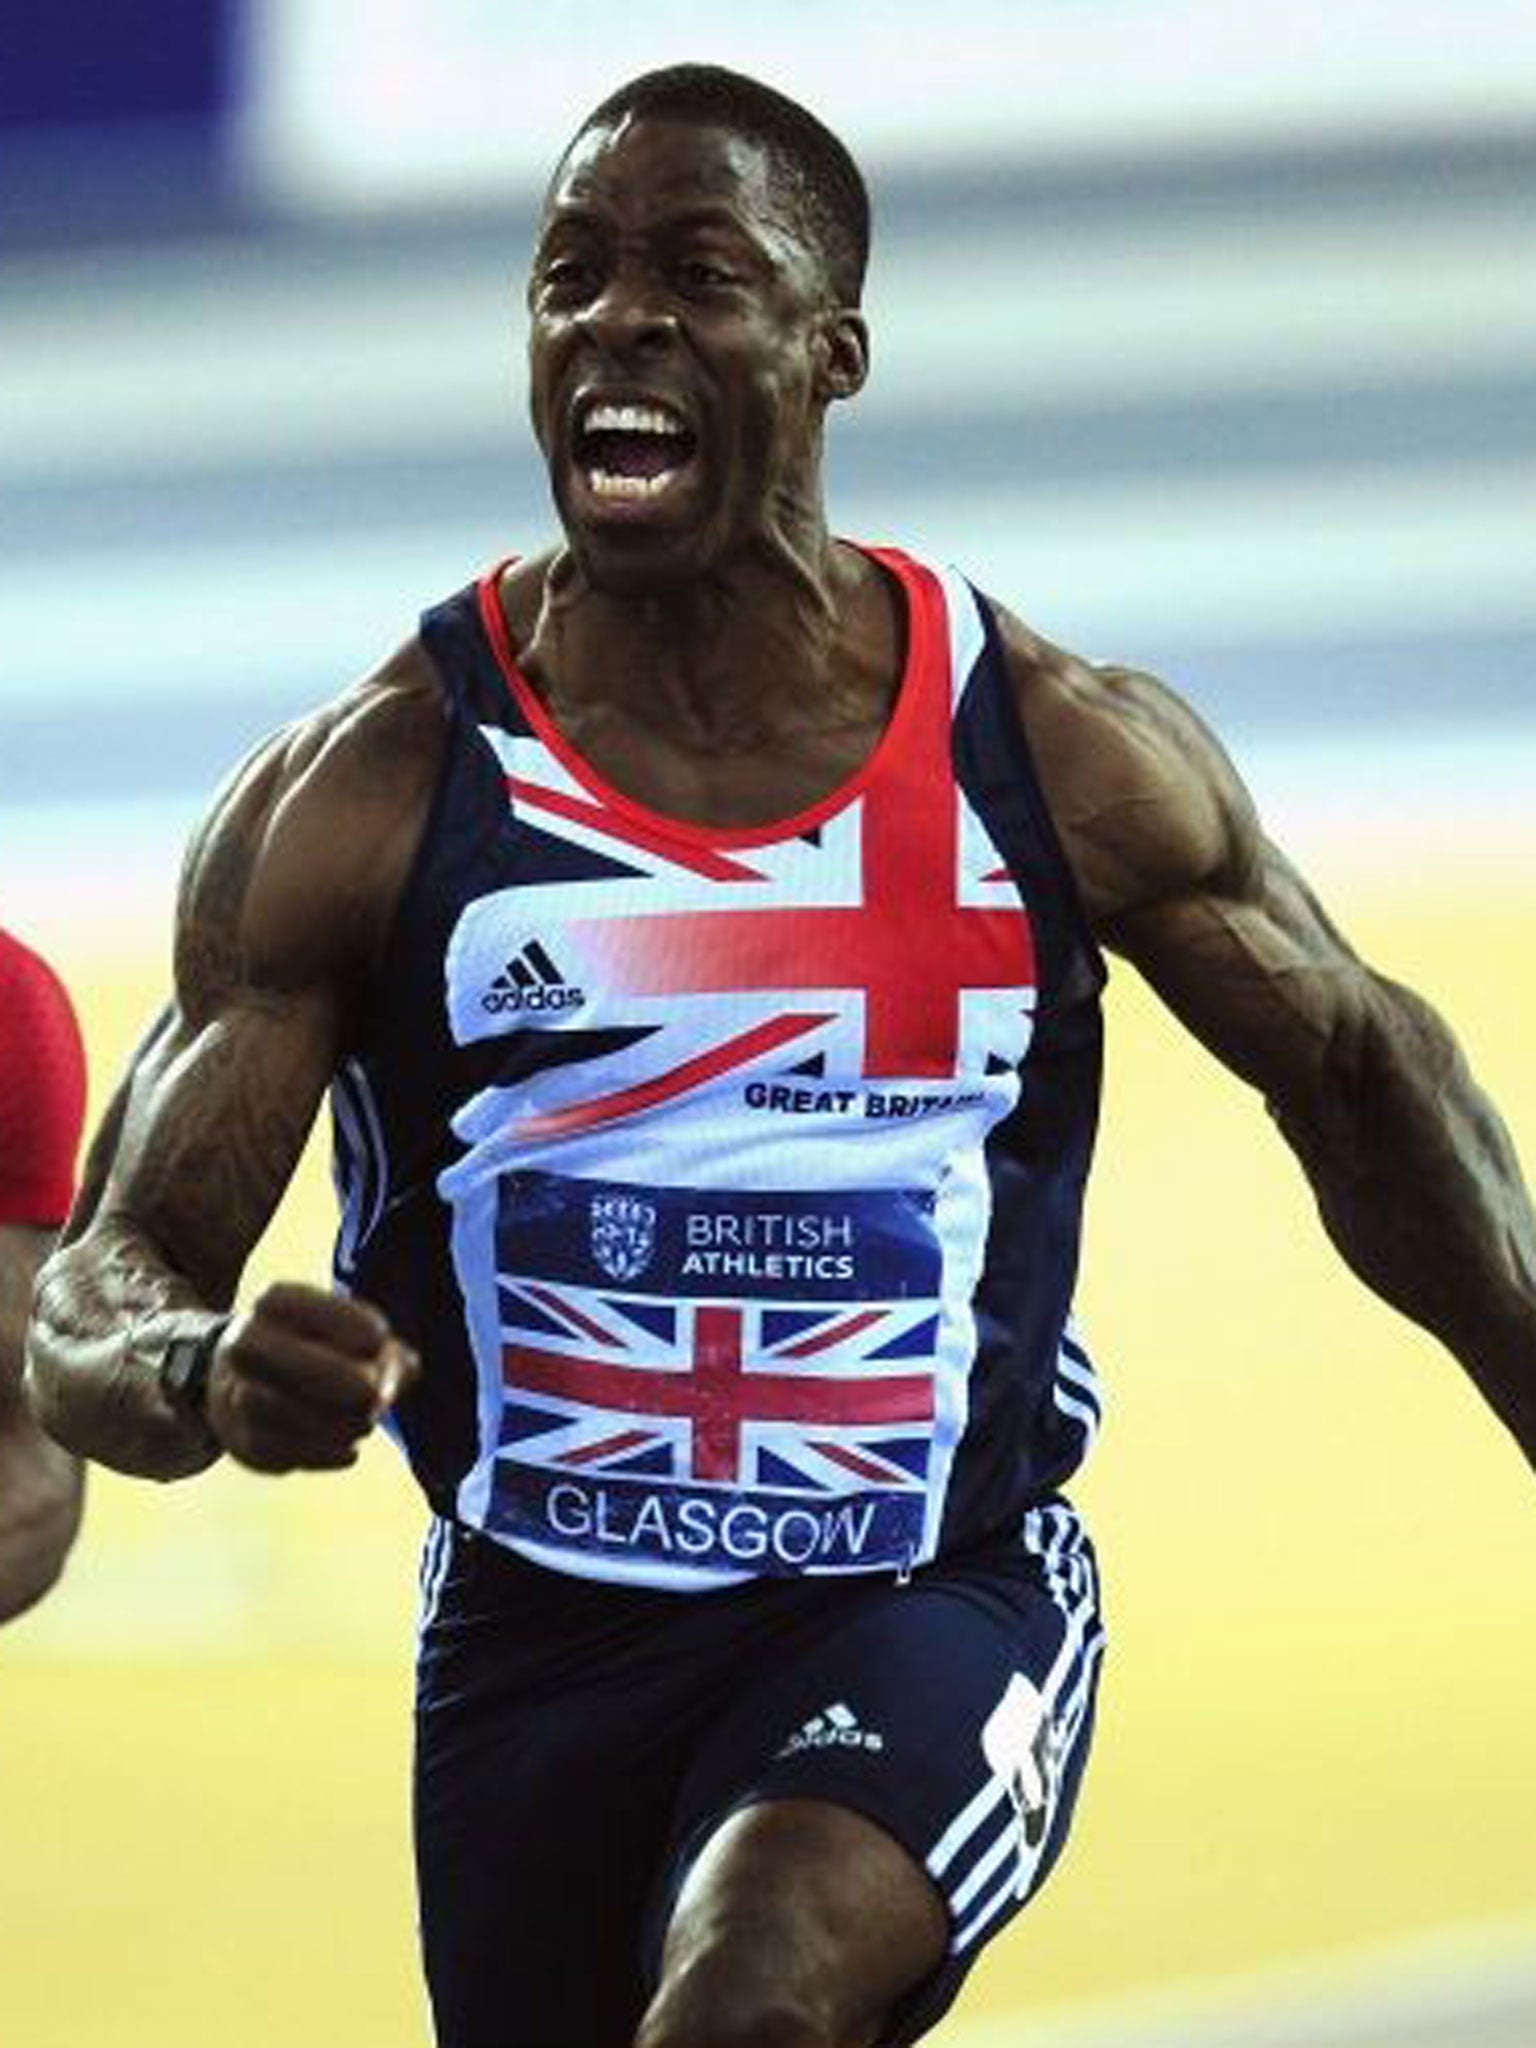 Dwain Chambers recorded the second fastest time of the year
in the 60m